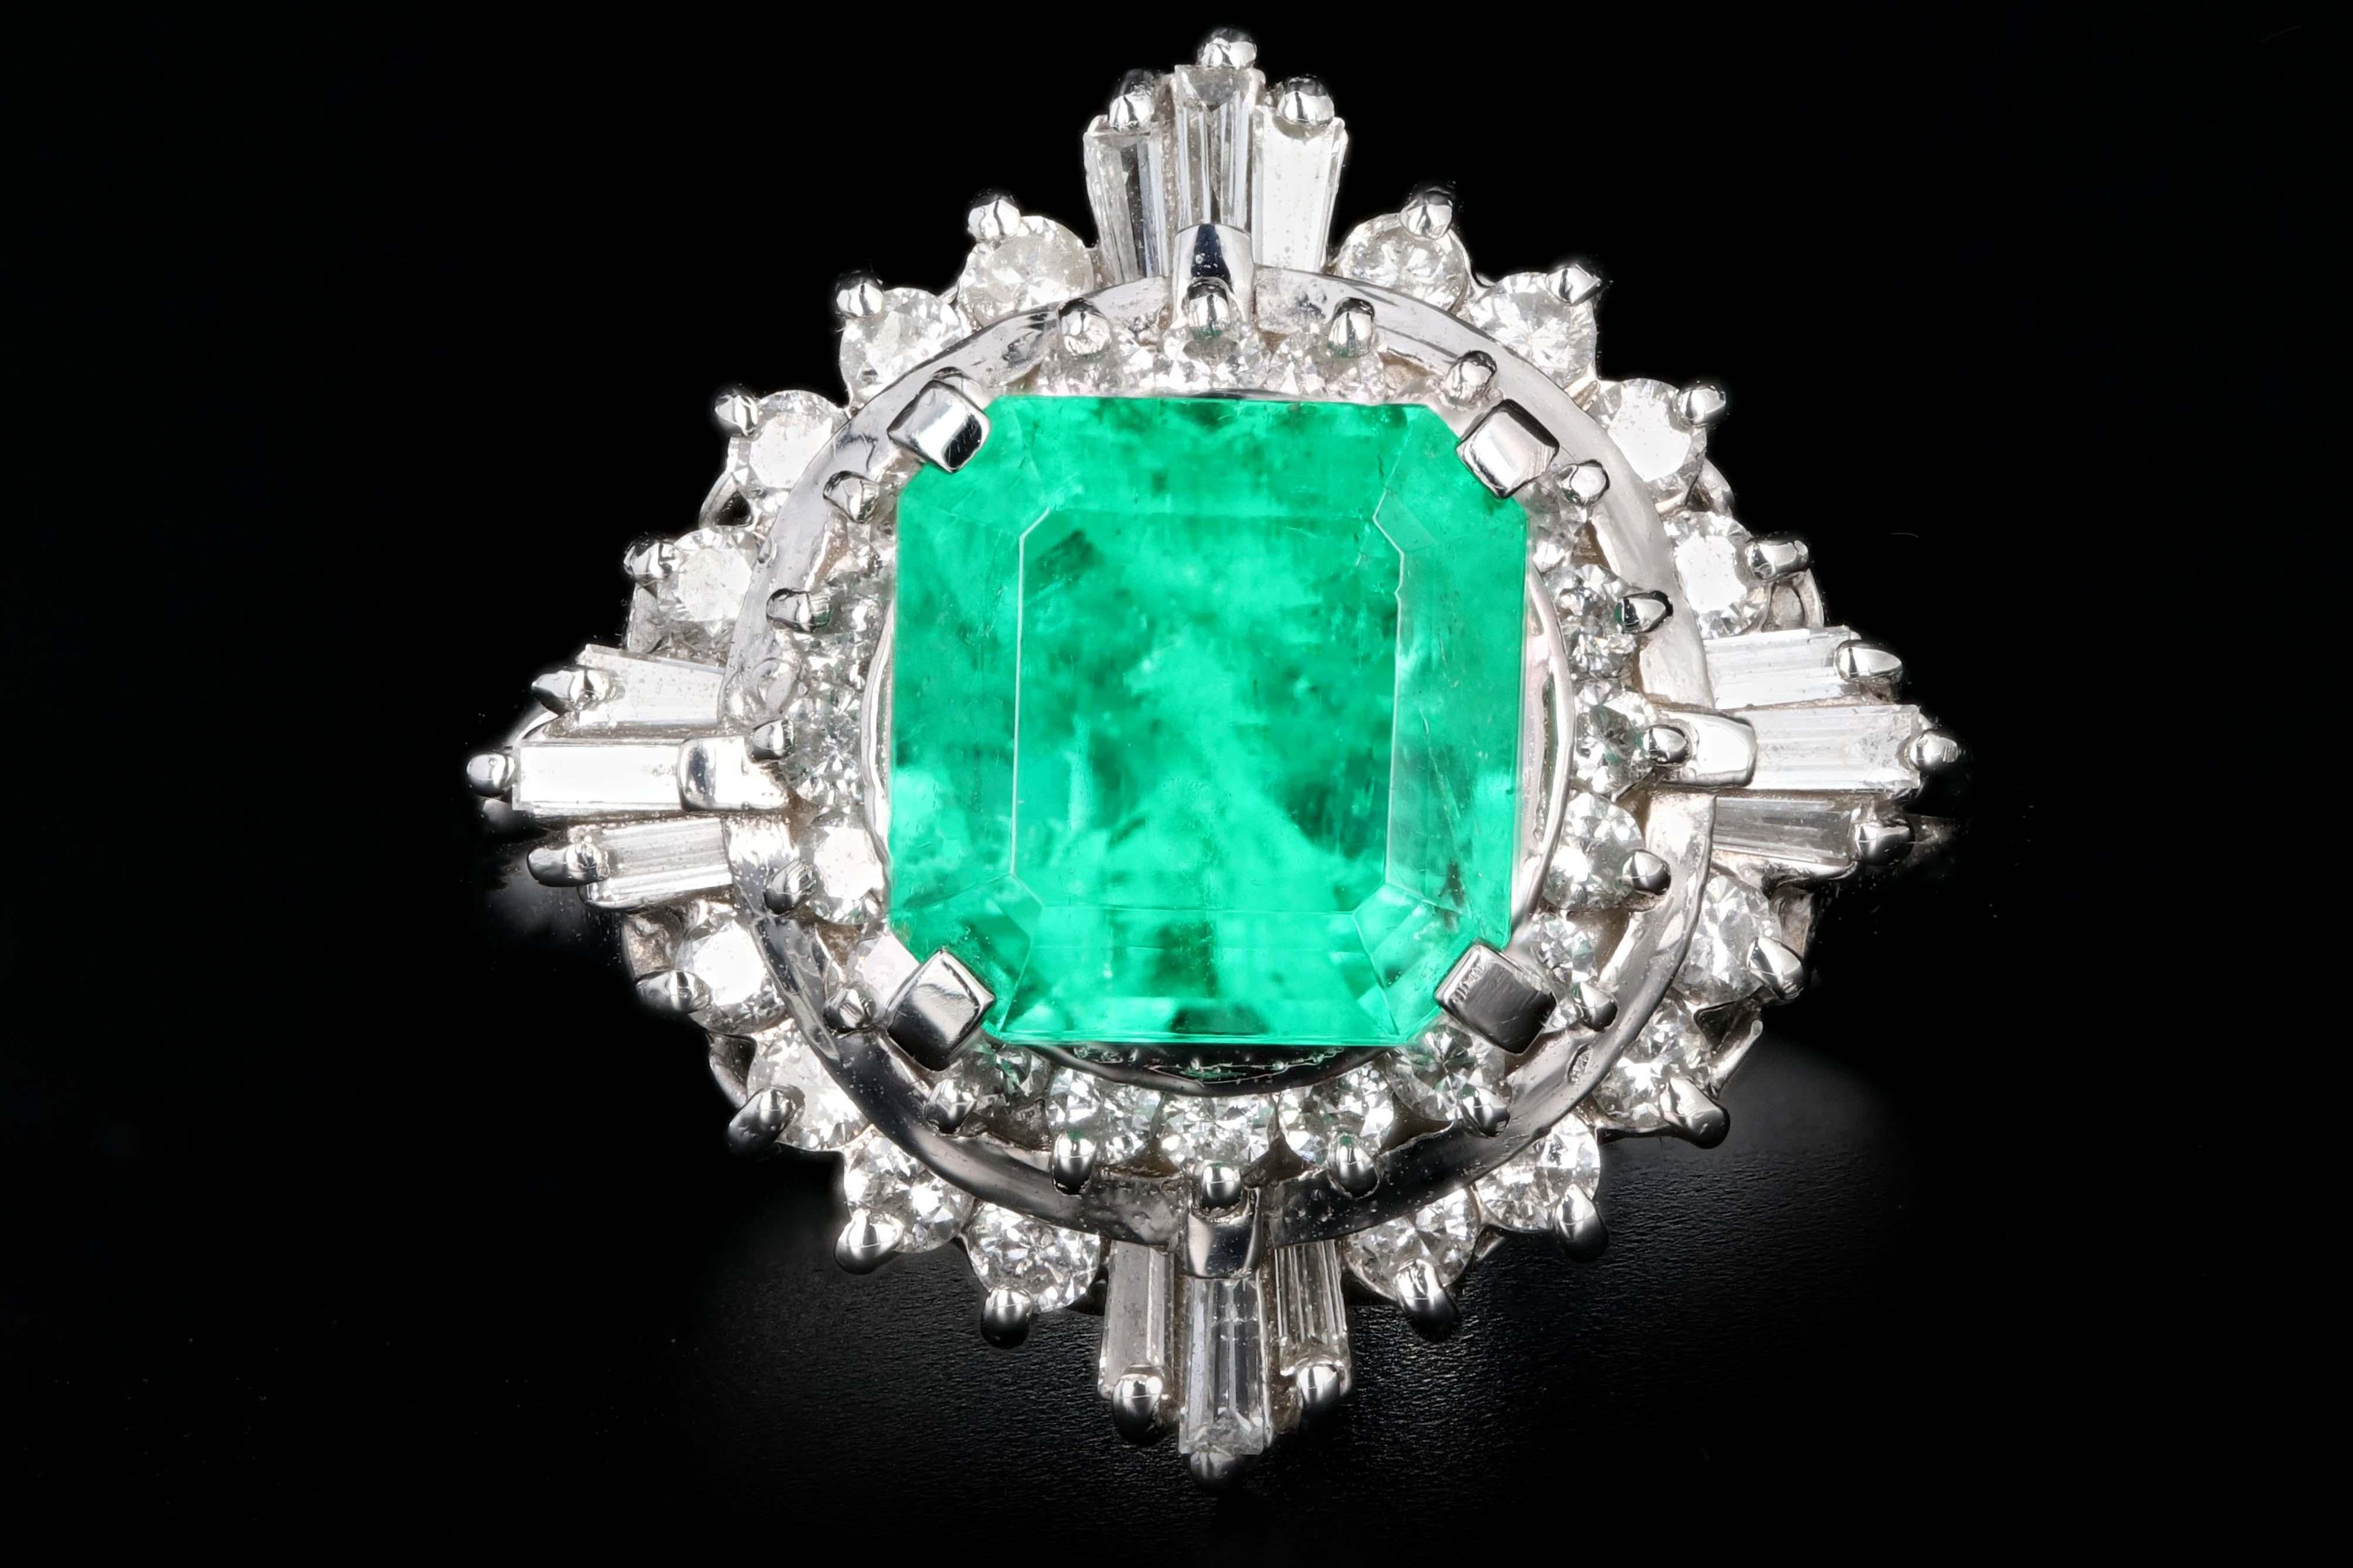 Era: Retro

Composition: Platinum

Primary Stone: Emerald

Carat Weight: 1.83 Carats

Accent Stone: Round Brilliant Cut & Tapered Baguette Cut Diamonds

Carat Weight: .56 Carats

Color: G-H

Clarity: Vs1/2

Total Carat Weight: 2.39 Carats

Ring